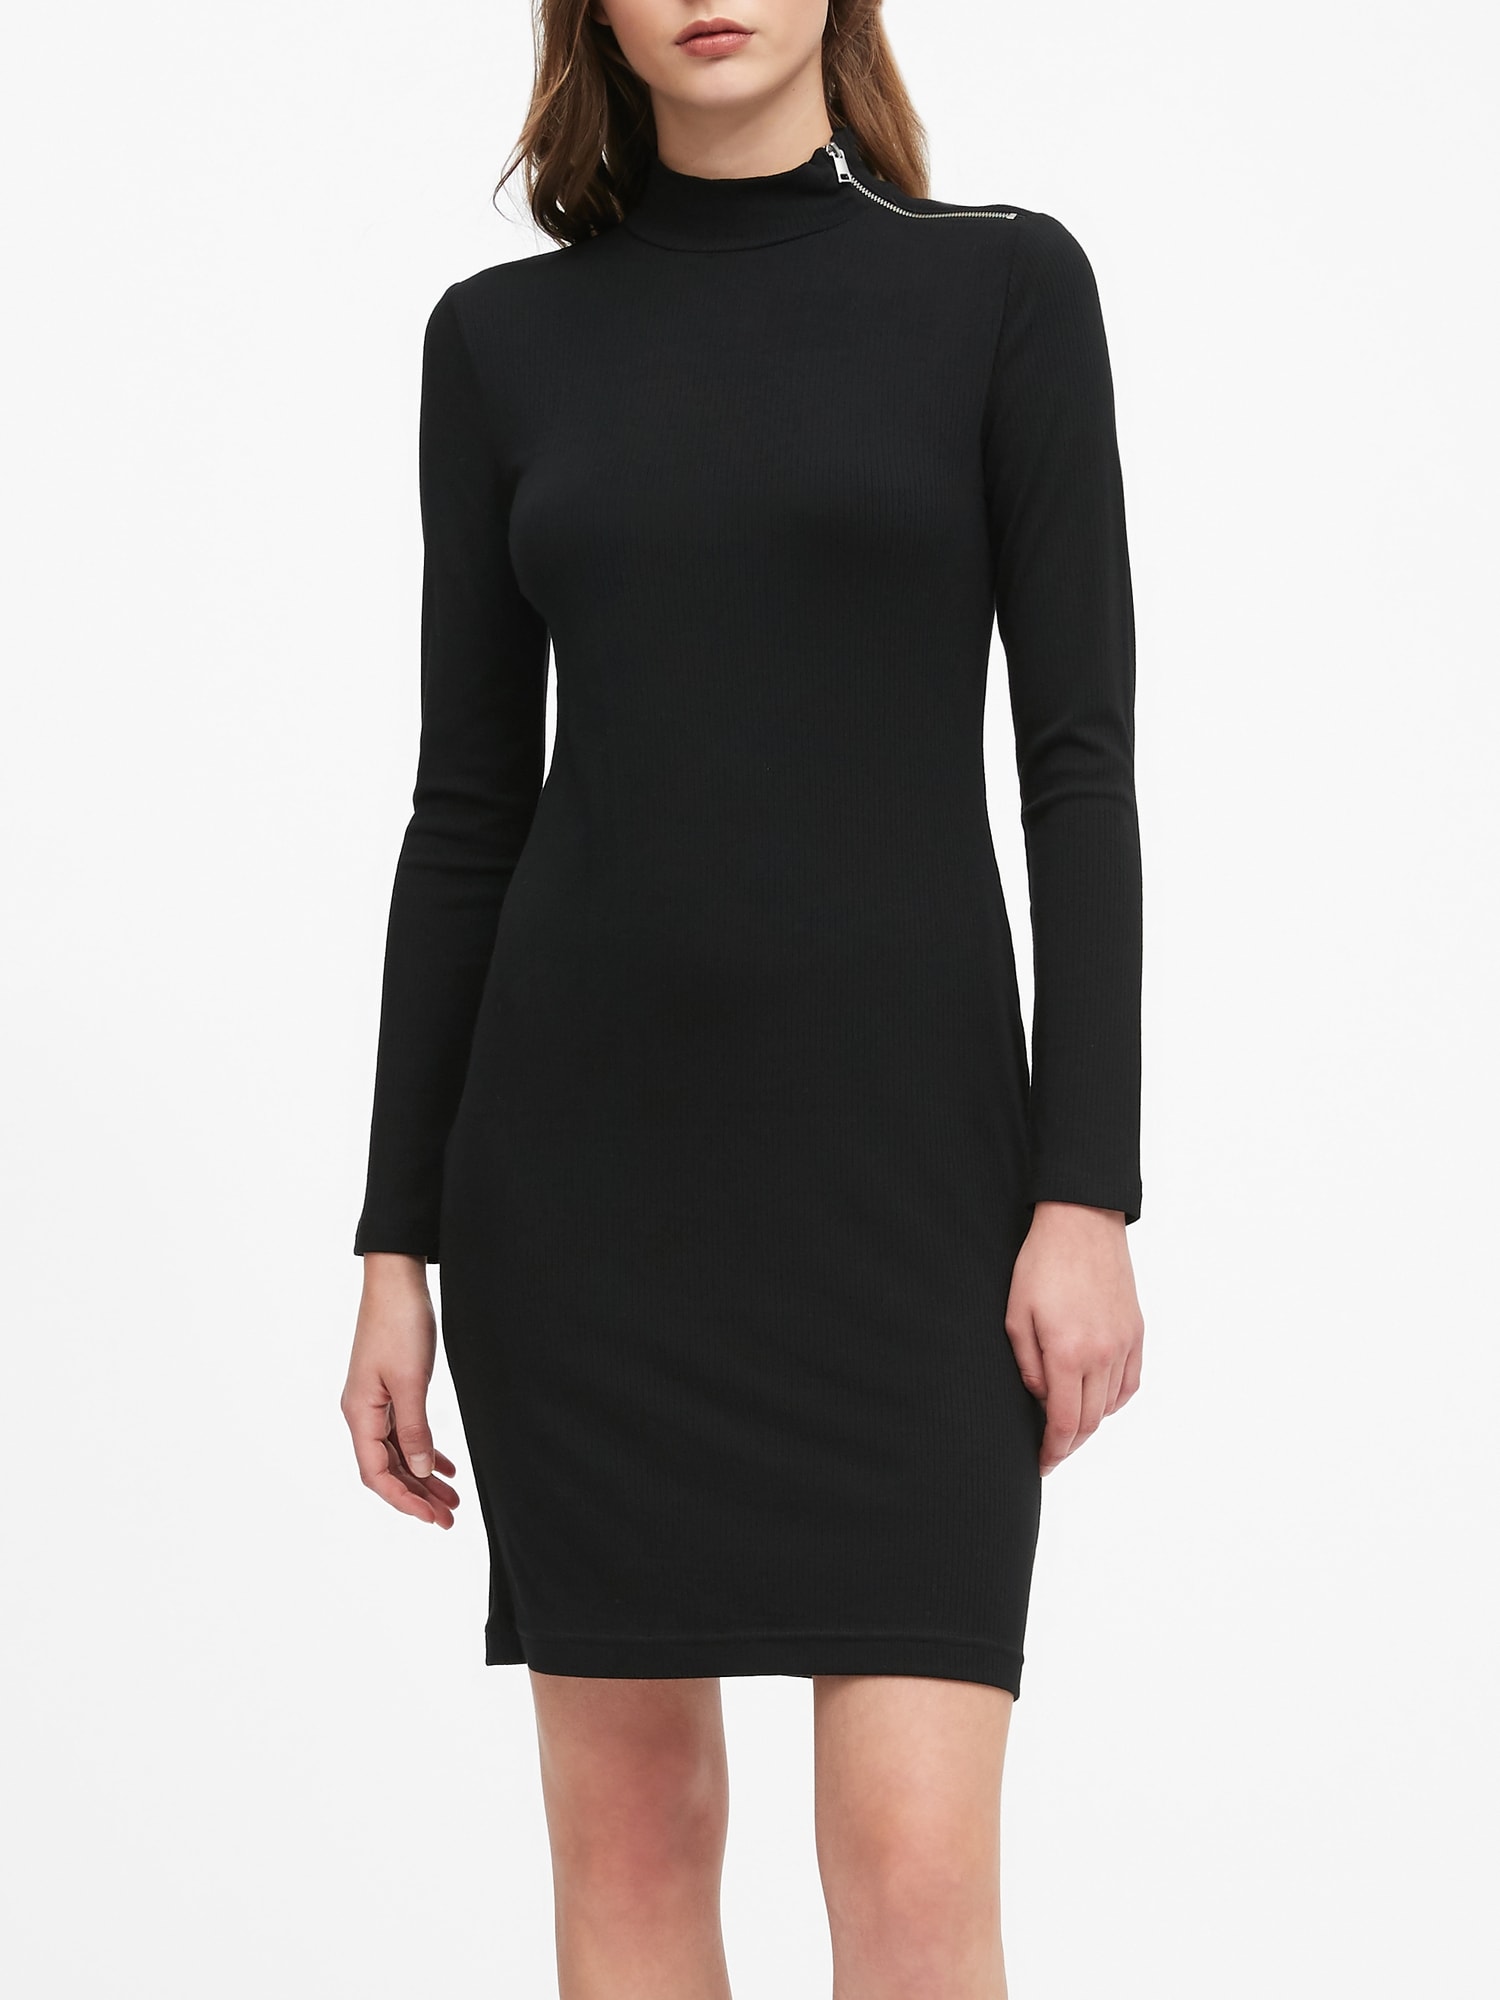 Turtleneck Ribbed-Knit Dress with Zipper